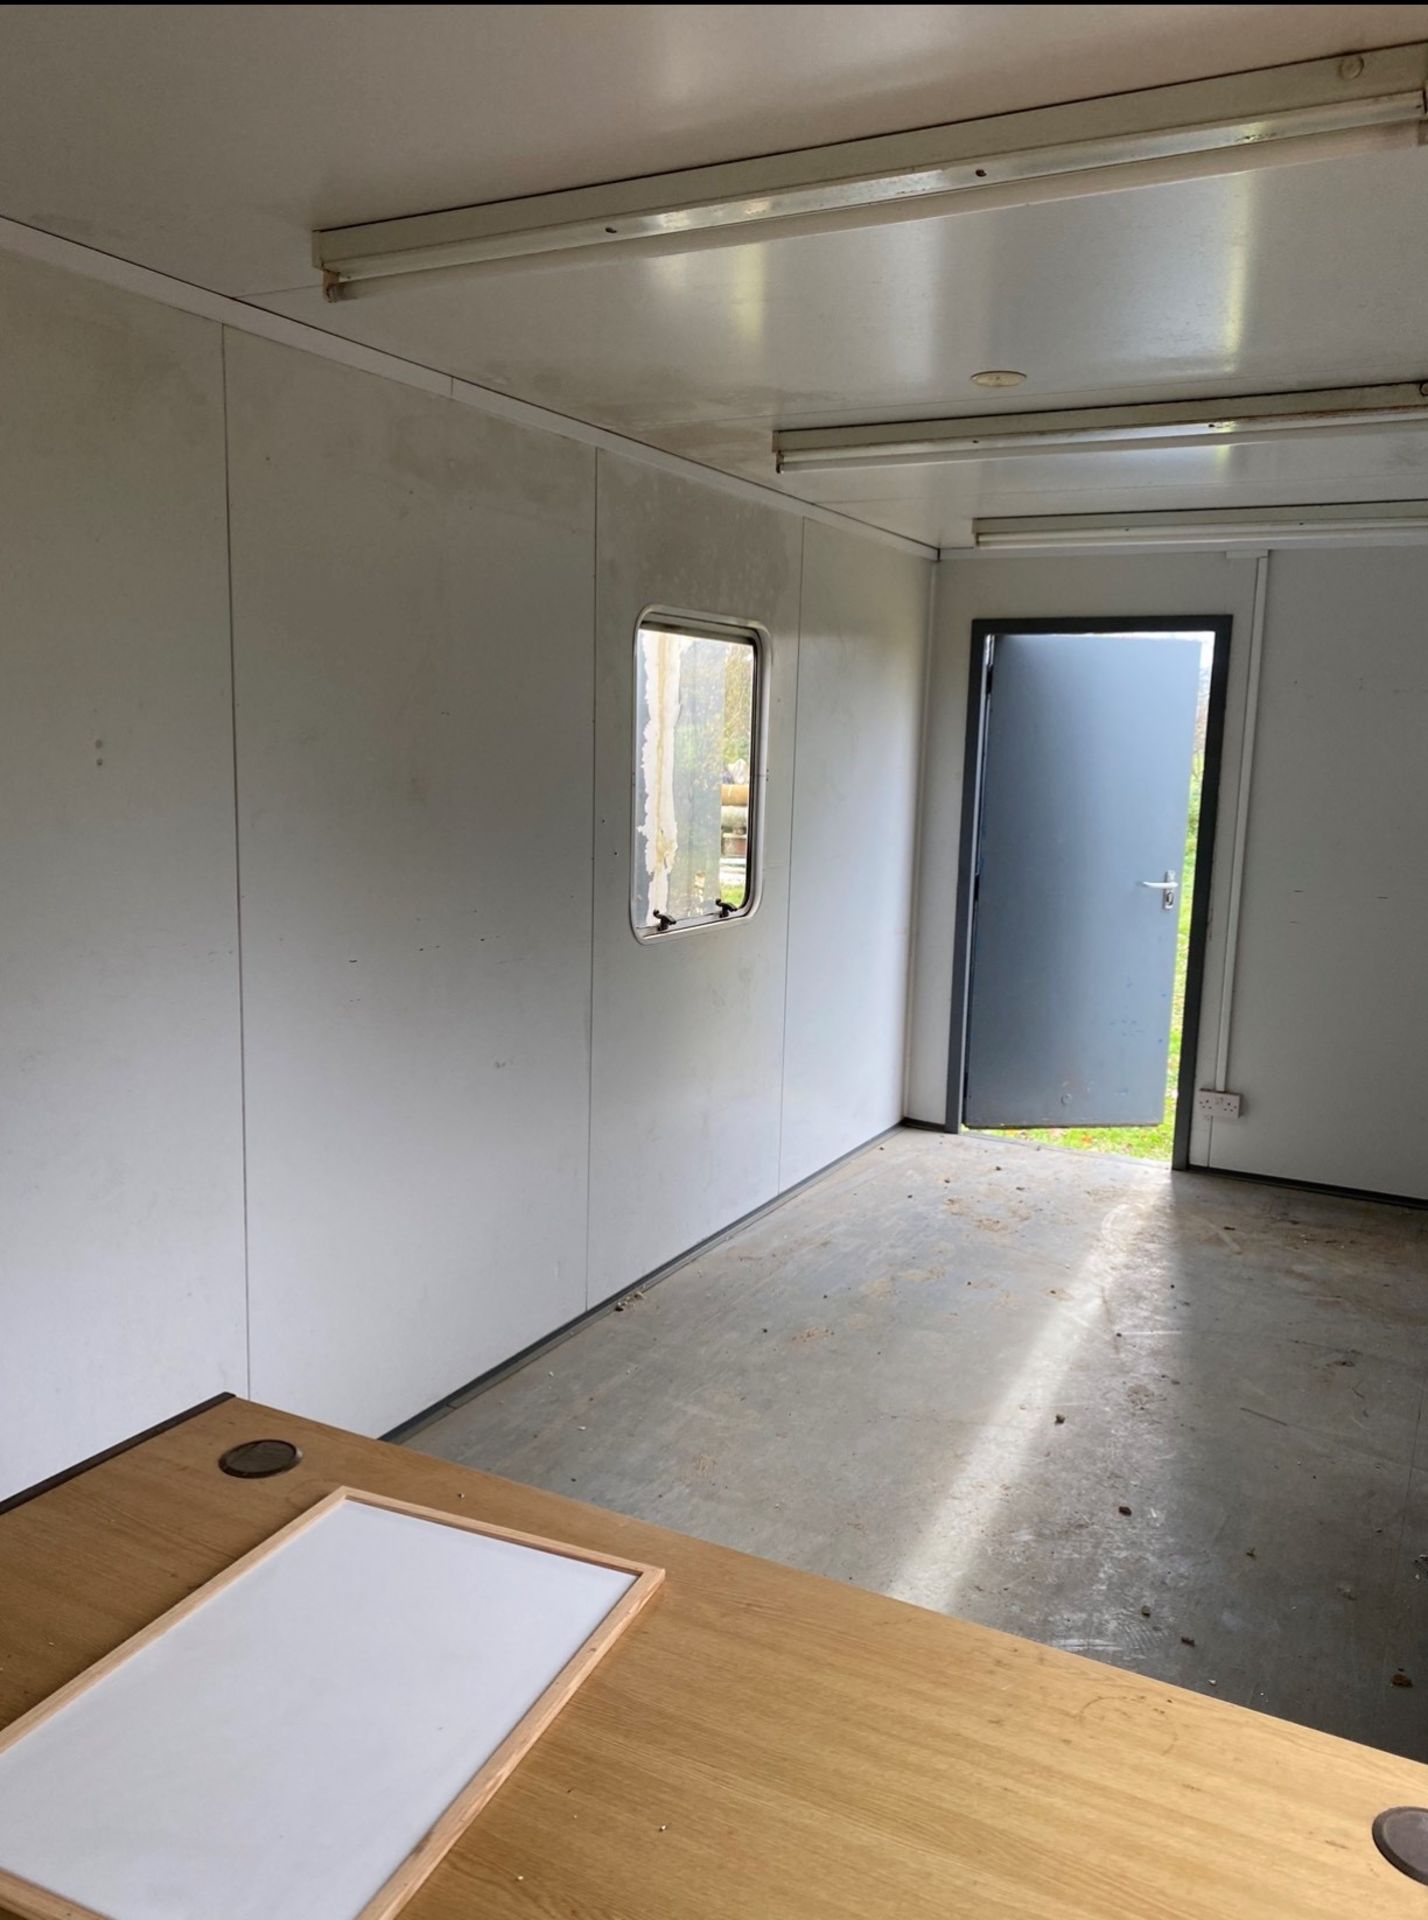 Site Office 20ft x 8ft - Image 8 of 8